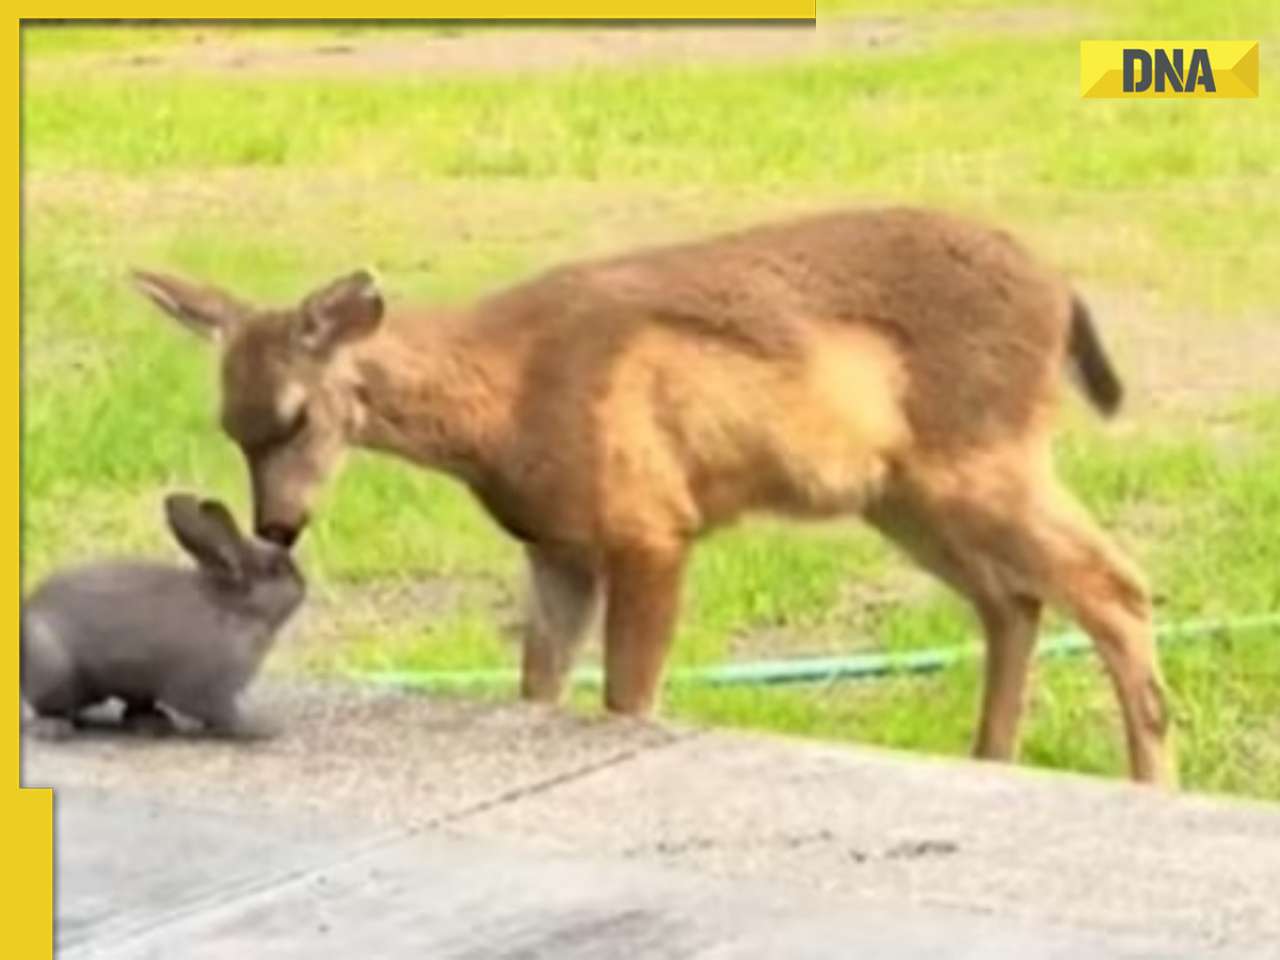 Real-life Bambi and Thumper? Adorable deer and rabbit video melts hearts online